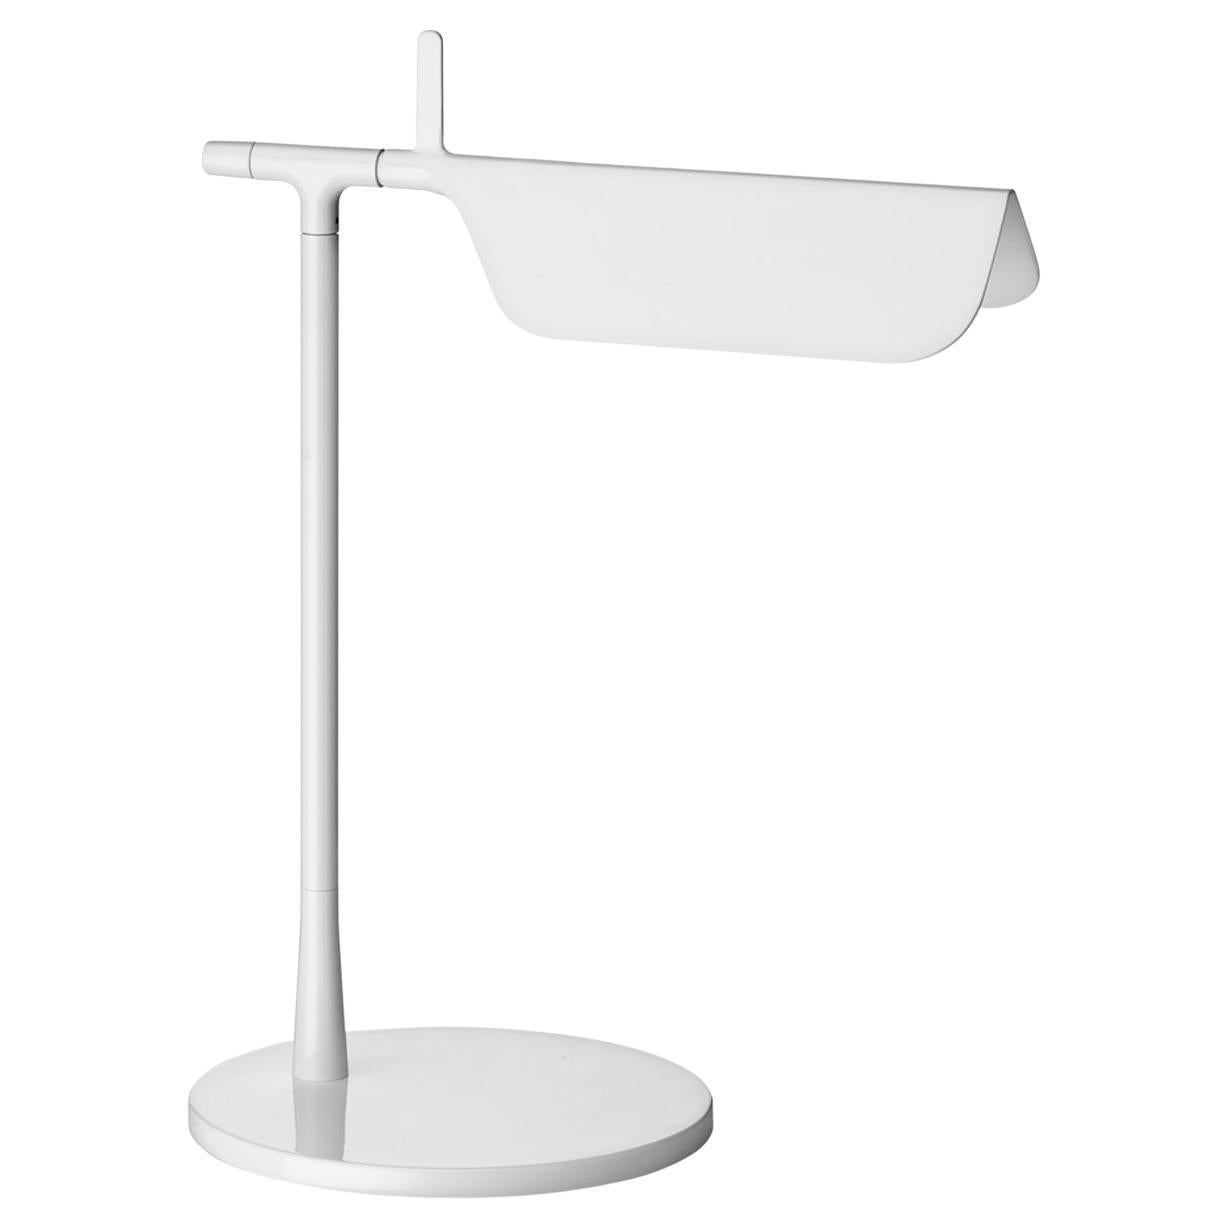 Flos Tab Table LED Lamp 2700K with Dimmer 90° Rotatable Head, White